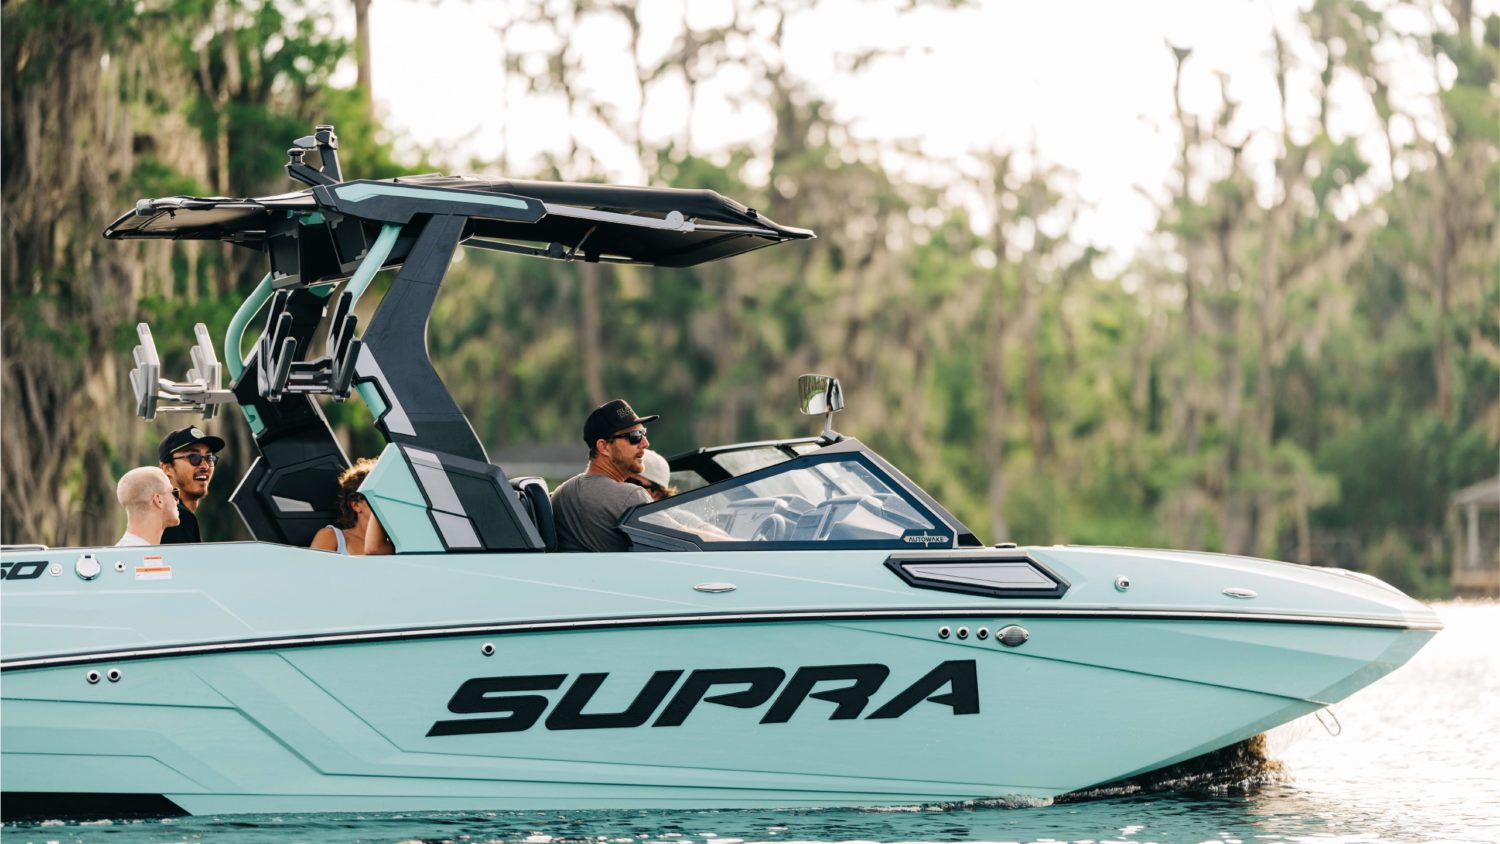 the brand new SUPRA model will be exhibited in Geneva for the first time at a Swiss boat show
